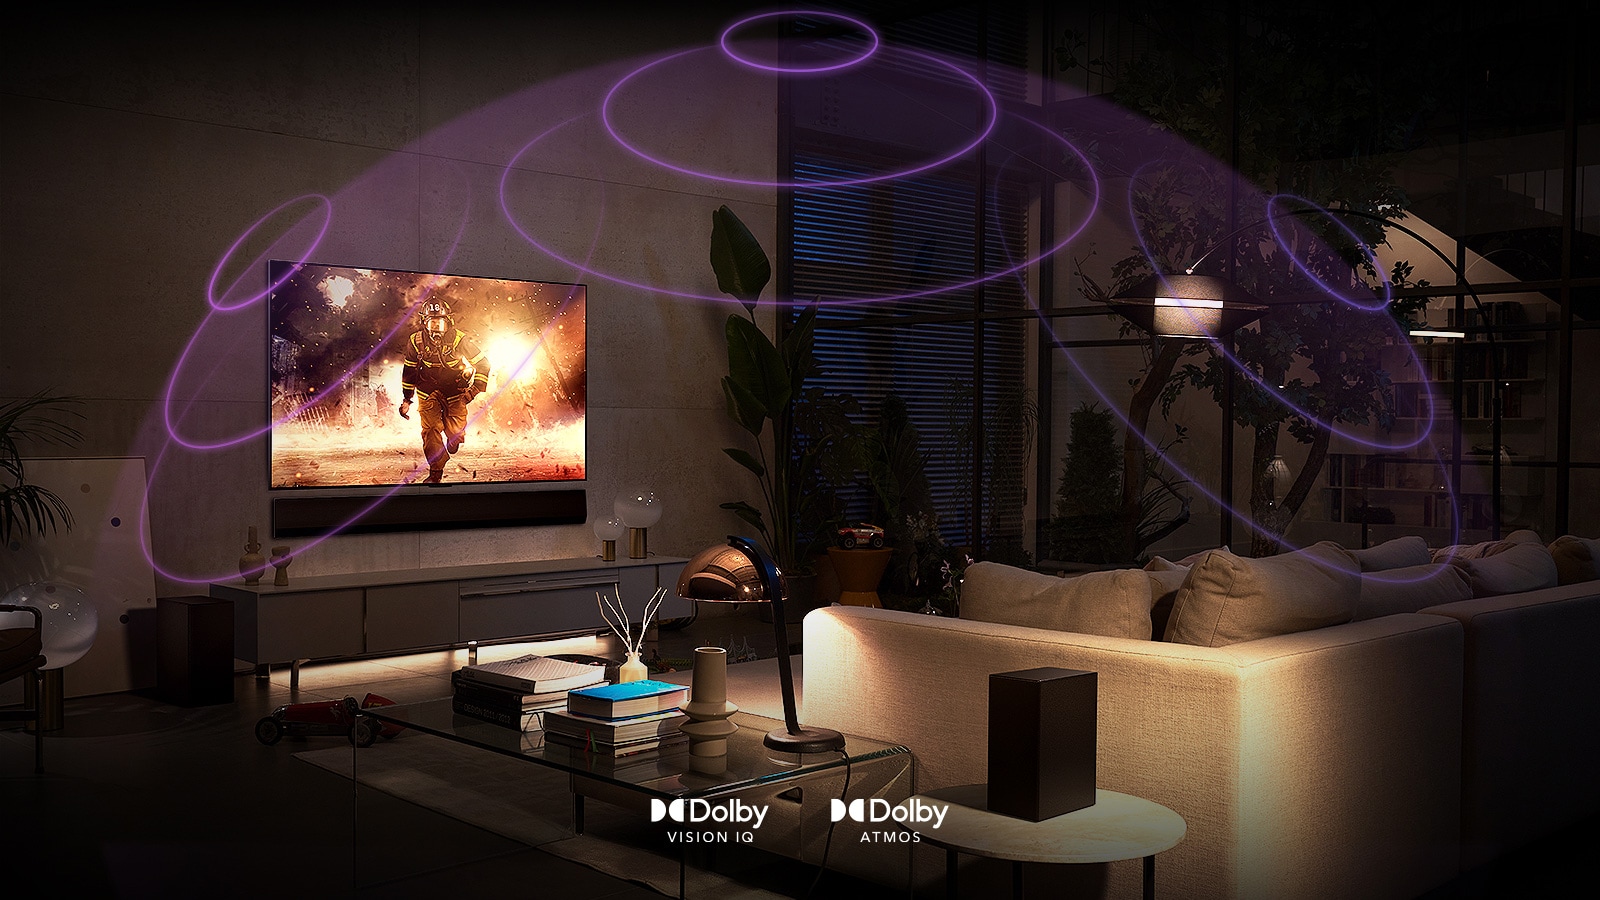 An image of an LG OLED TV in a dimly lit room showing a sci-fi movie. Soundwaves create a dome around the sofa and TV, depicting the immersion of Dolby Atmos and Dolby Vision.